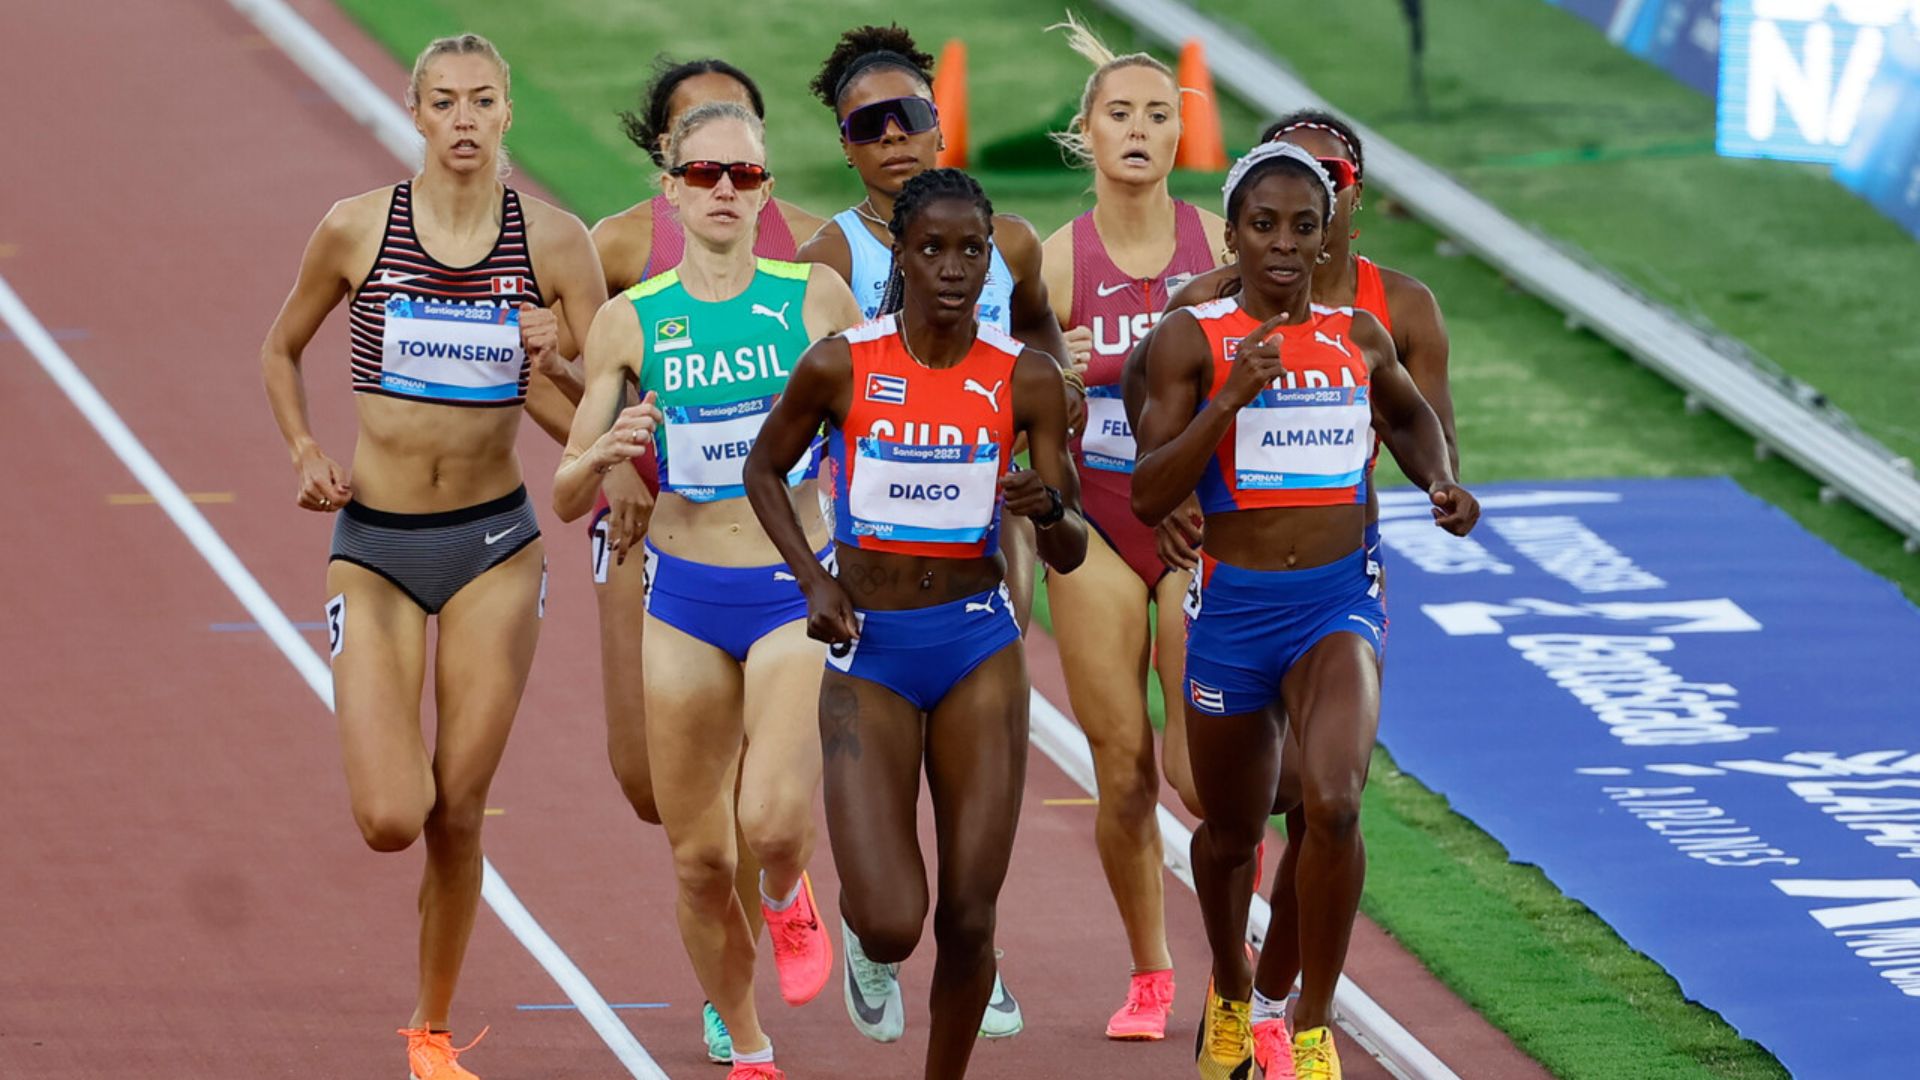 Cuba Wins Gold and Bronze in Female's 800-Meters